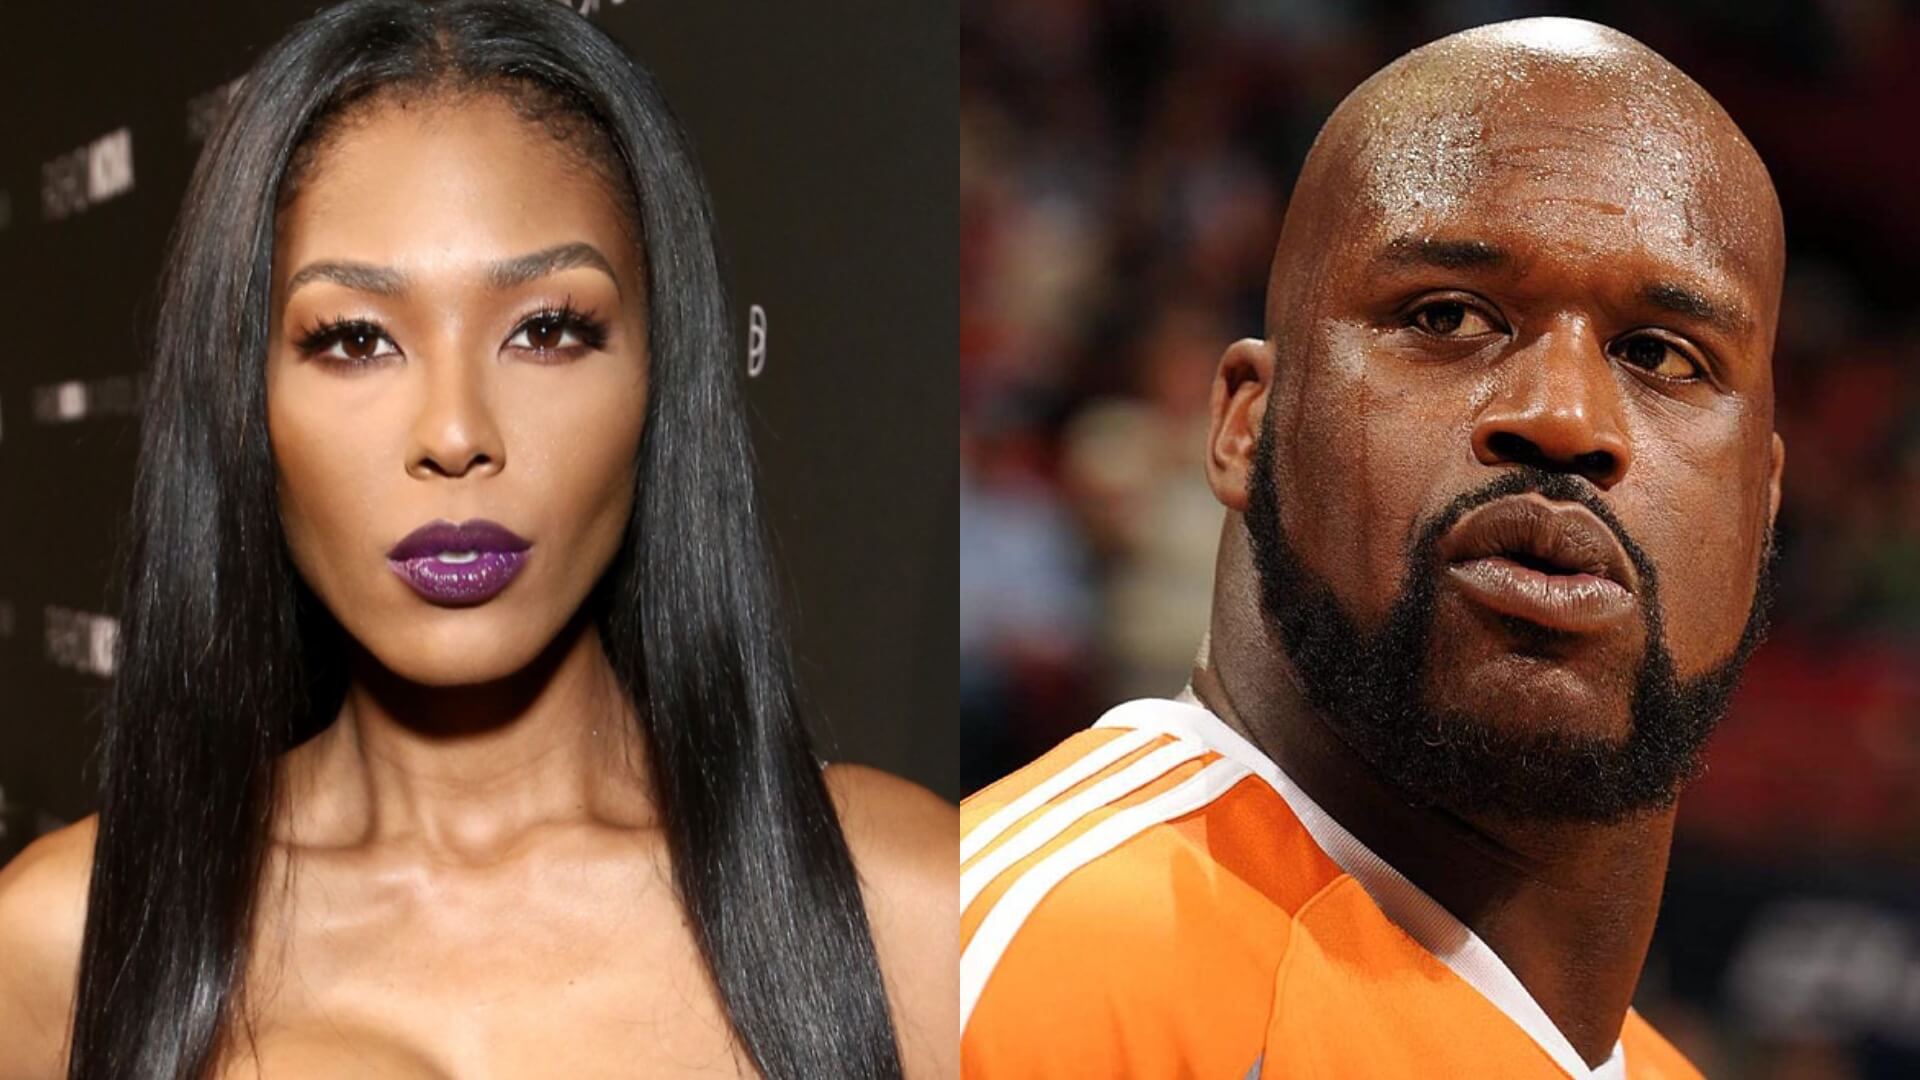 Moniece Slaughter EXPOSES Shaq For Texting Her ’Kill Yourself’ Following Their Nasty Breakup!